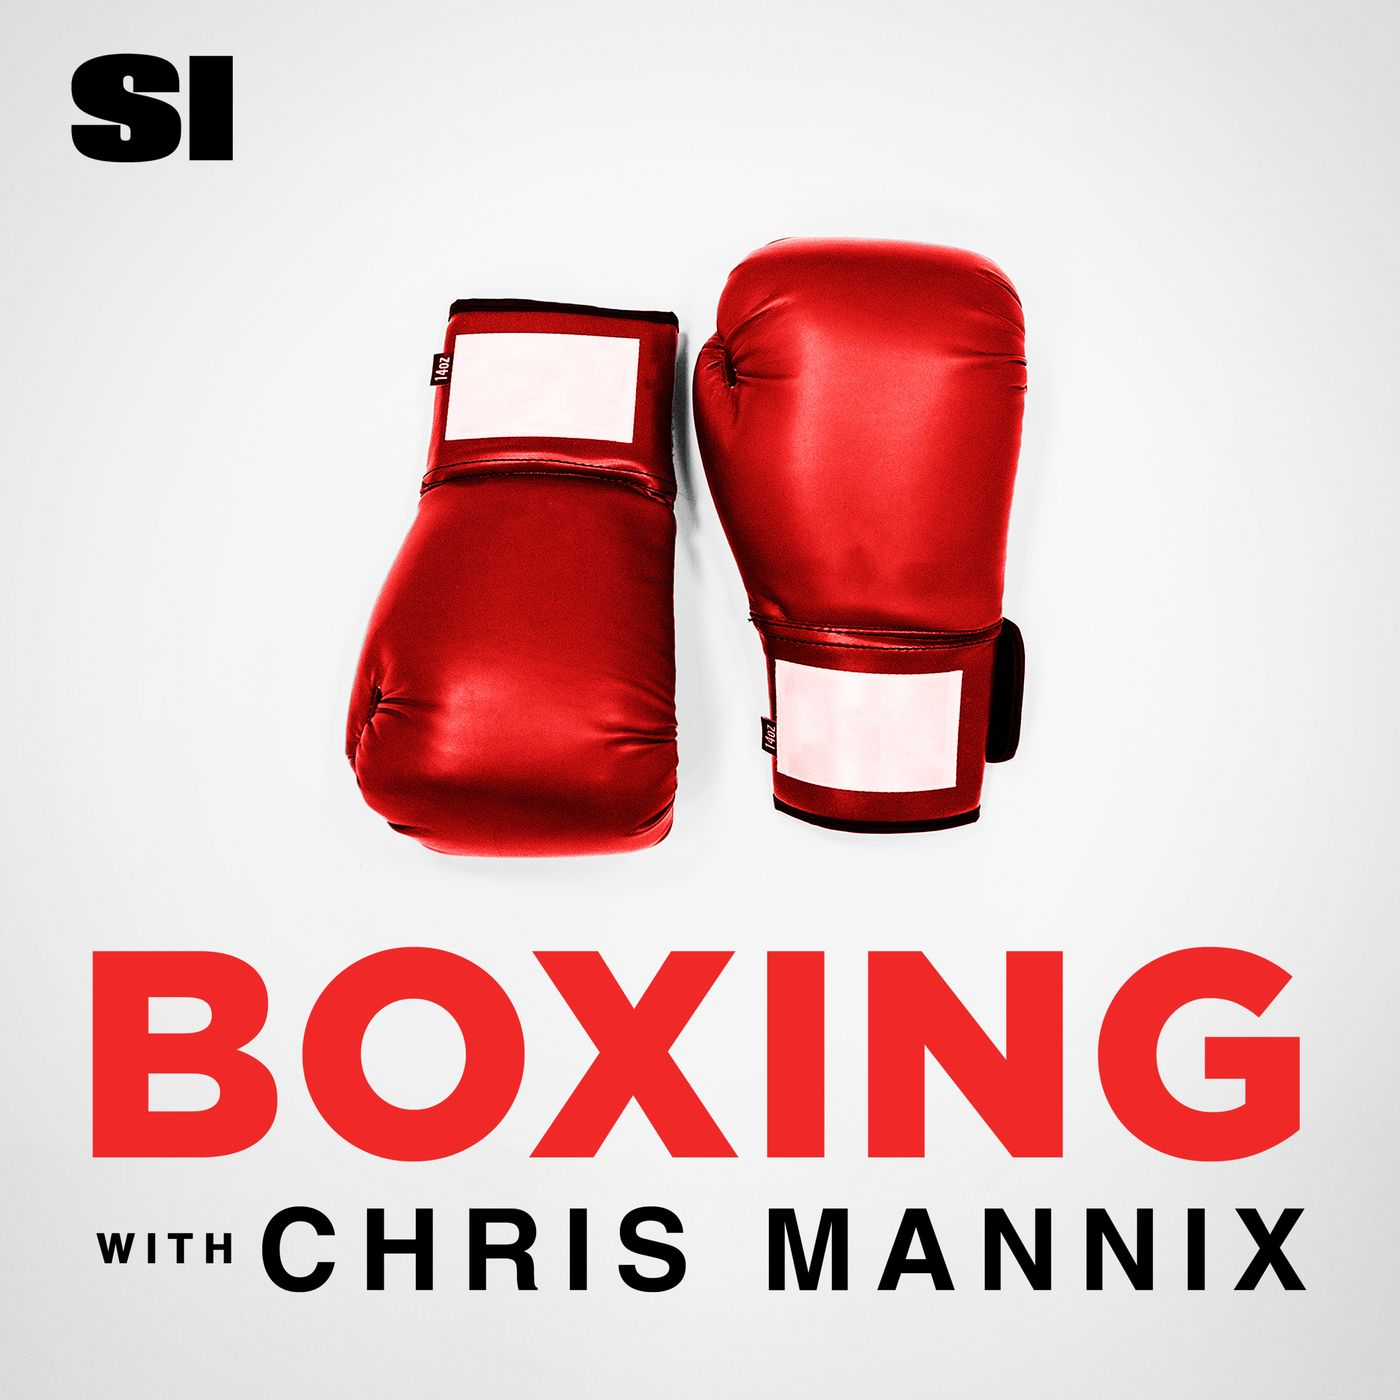 A highlight from Boxing with Chris Mannix - Tank Davis - Ryan Garcia is in doubt